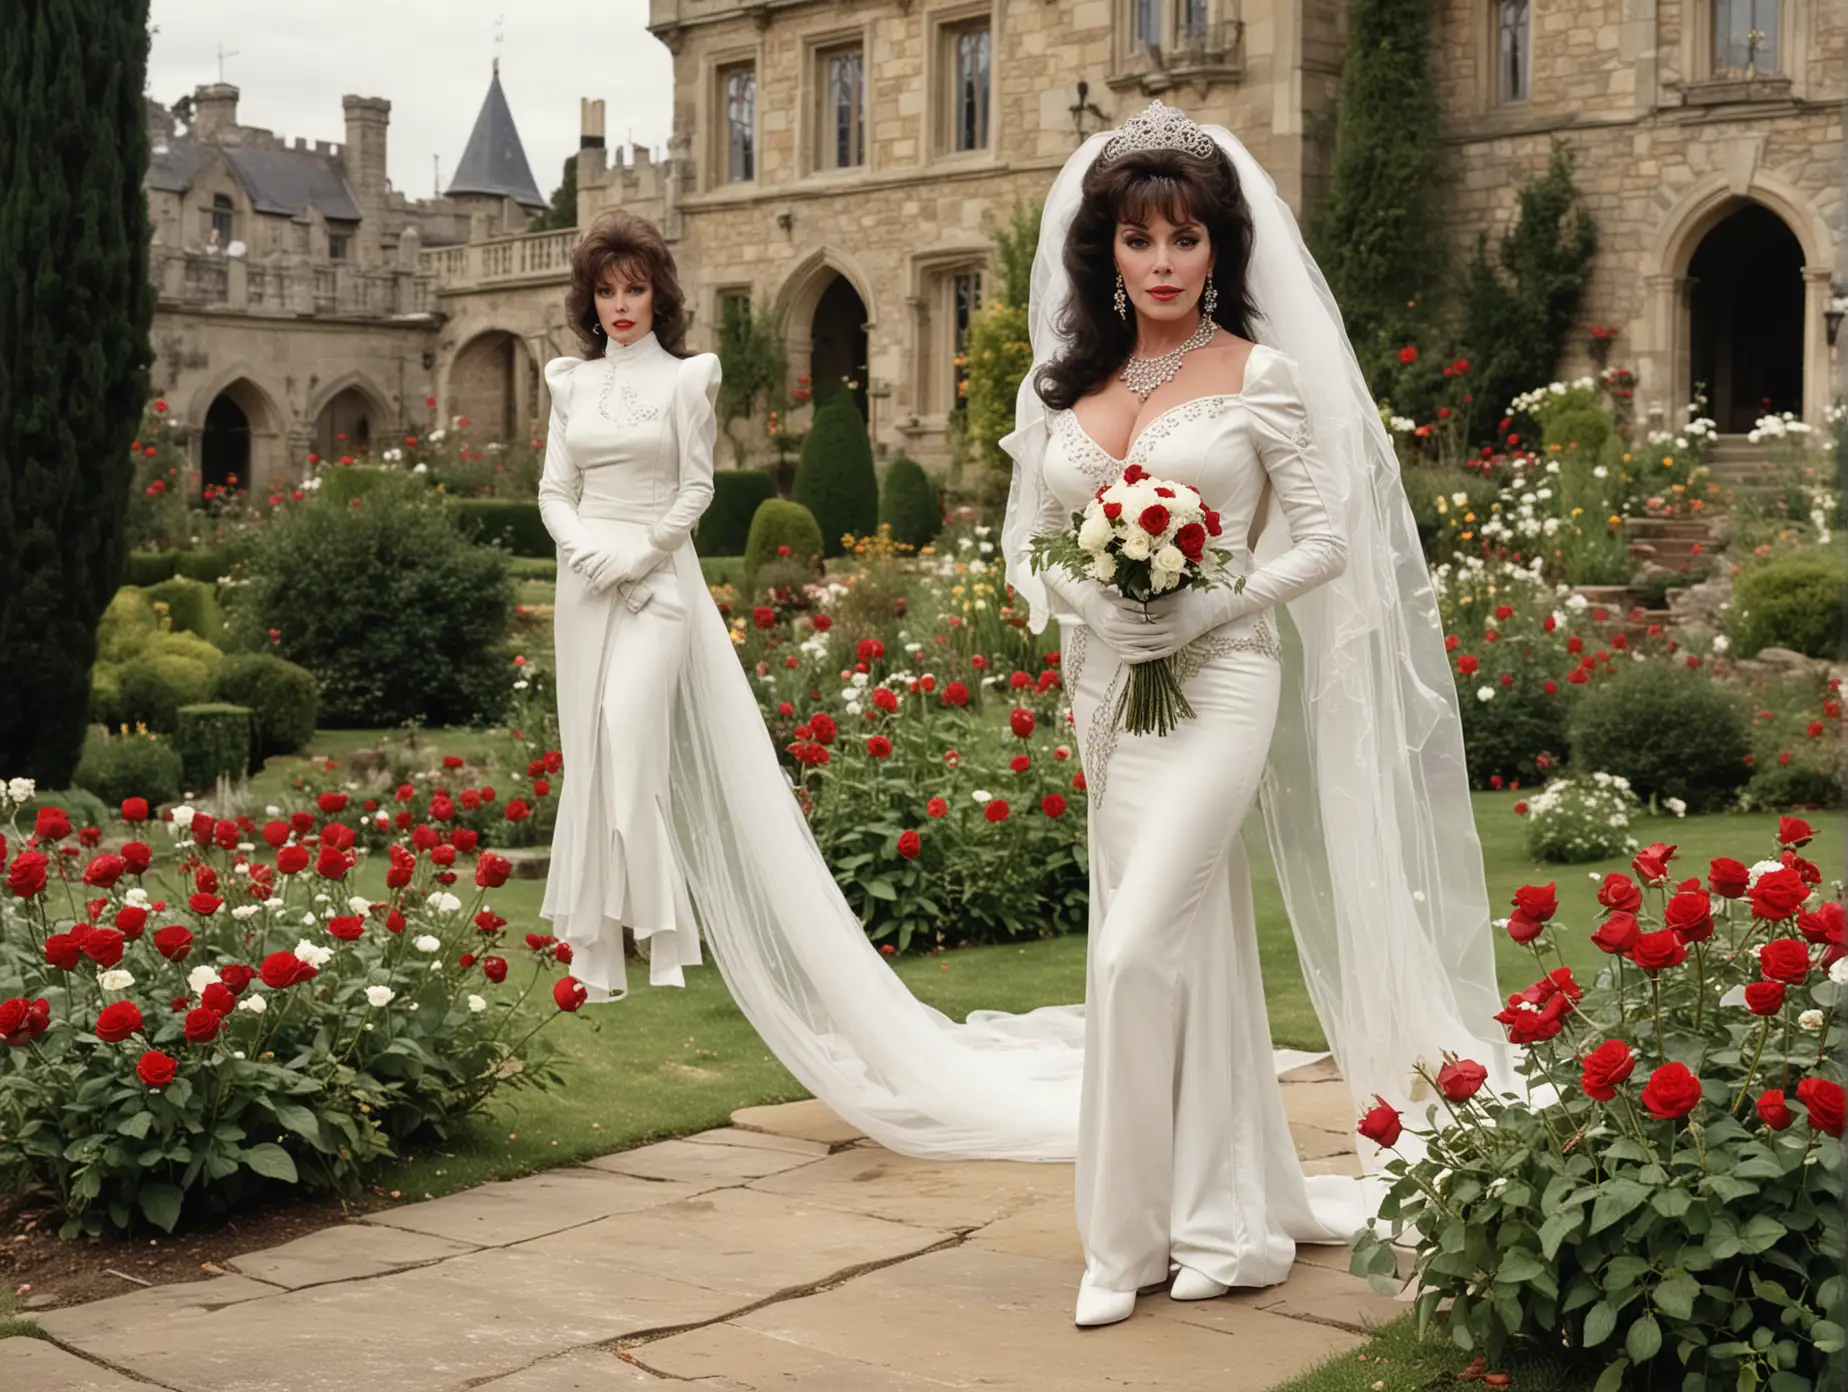 Elegant-1980s-Dynasty-Wedding-Alexis-Colby-in-White-Leather-Attire-with-Red-Roses